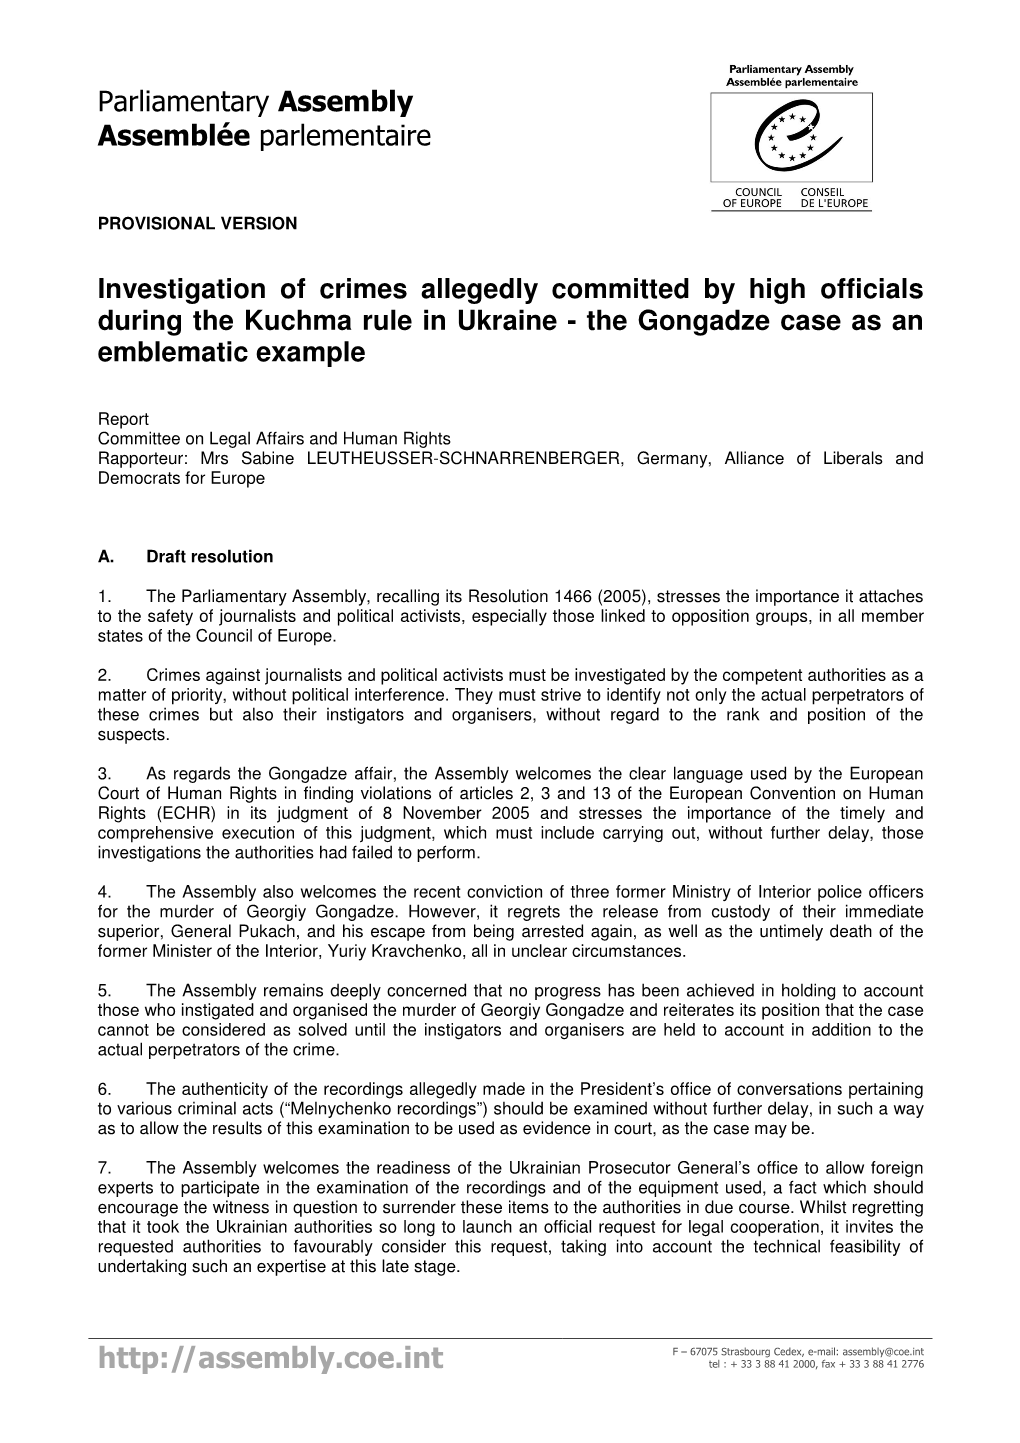 Investigation of Crimes Allegedly Committed by High Officials During the Kuchma Rule in Ukraine - the Gongadze Case As an Emblematic Example